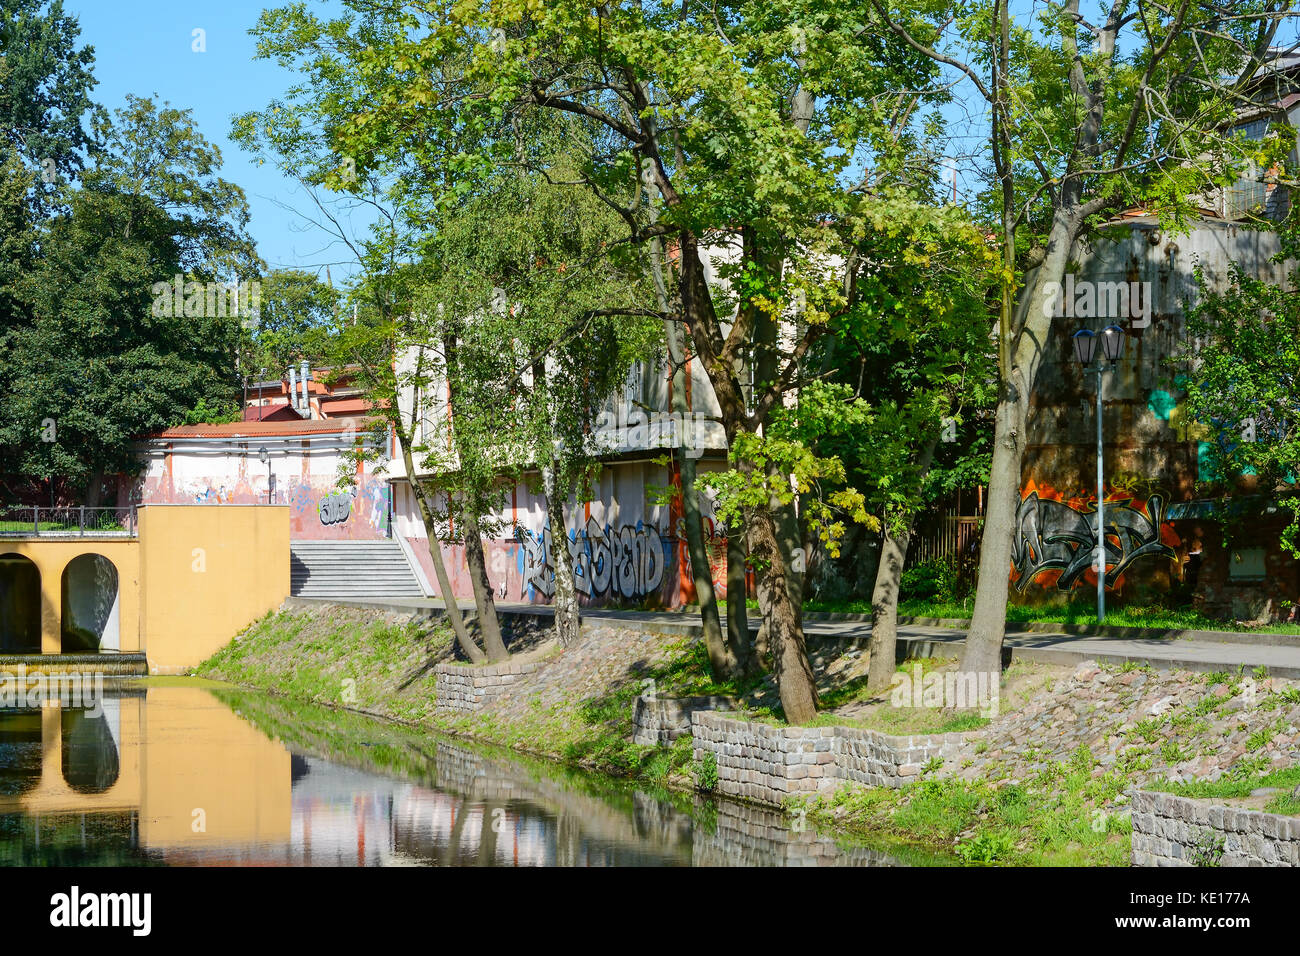 Kaliningrad, a picturesque Bank of the Lower pond Stock Photo